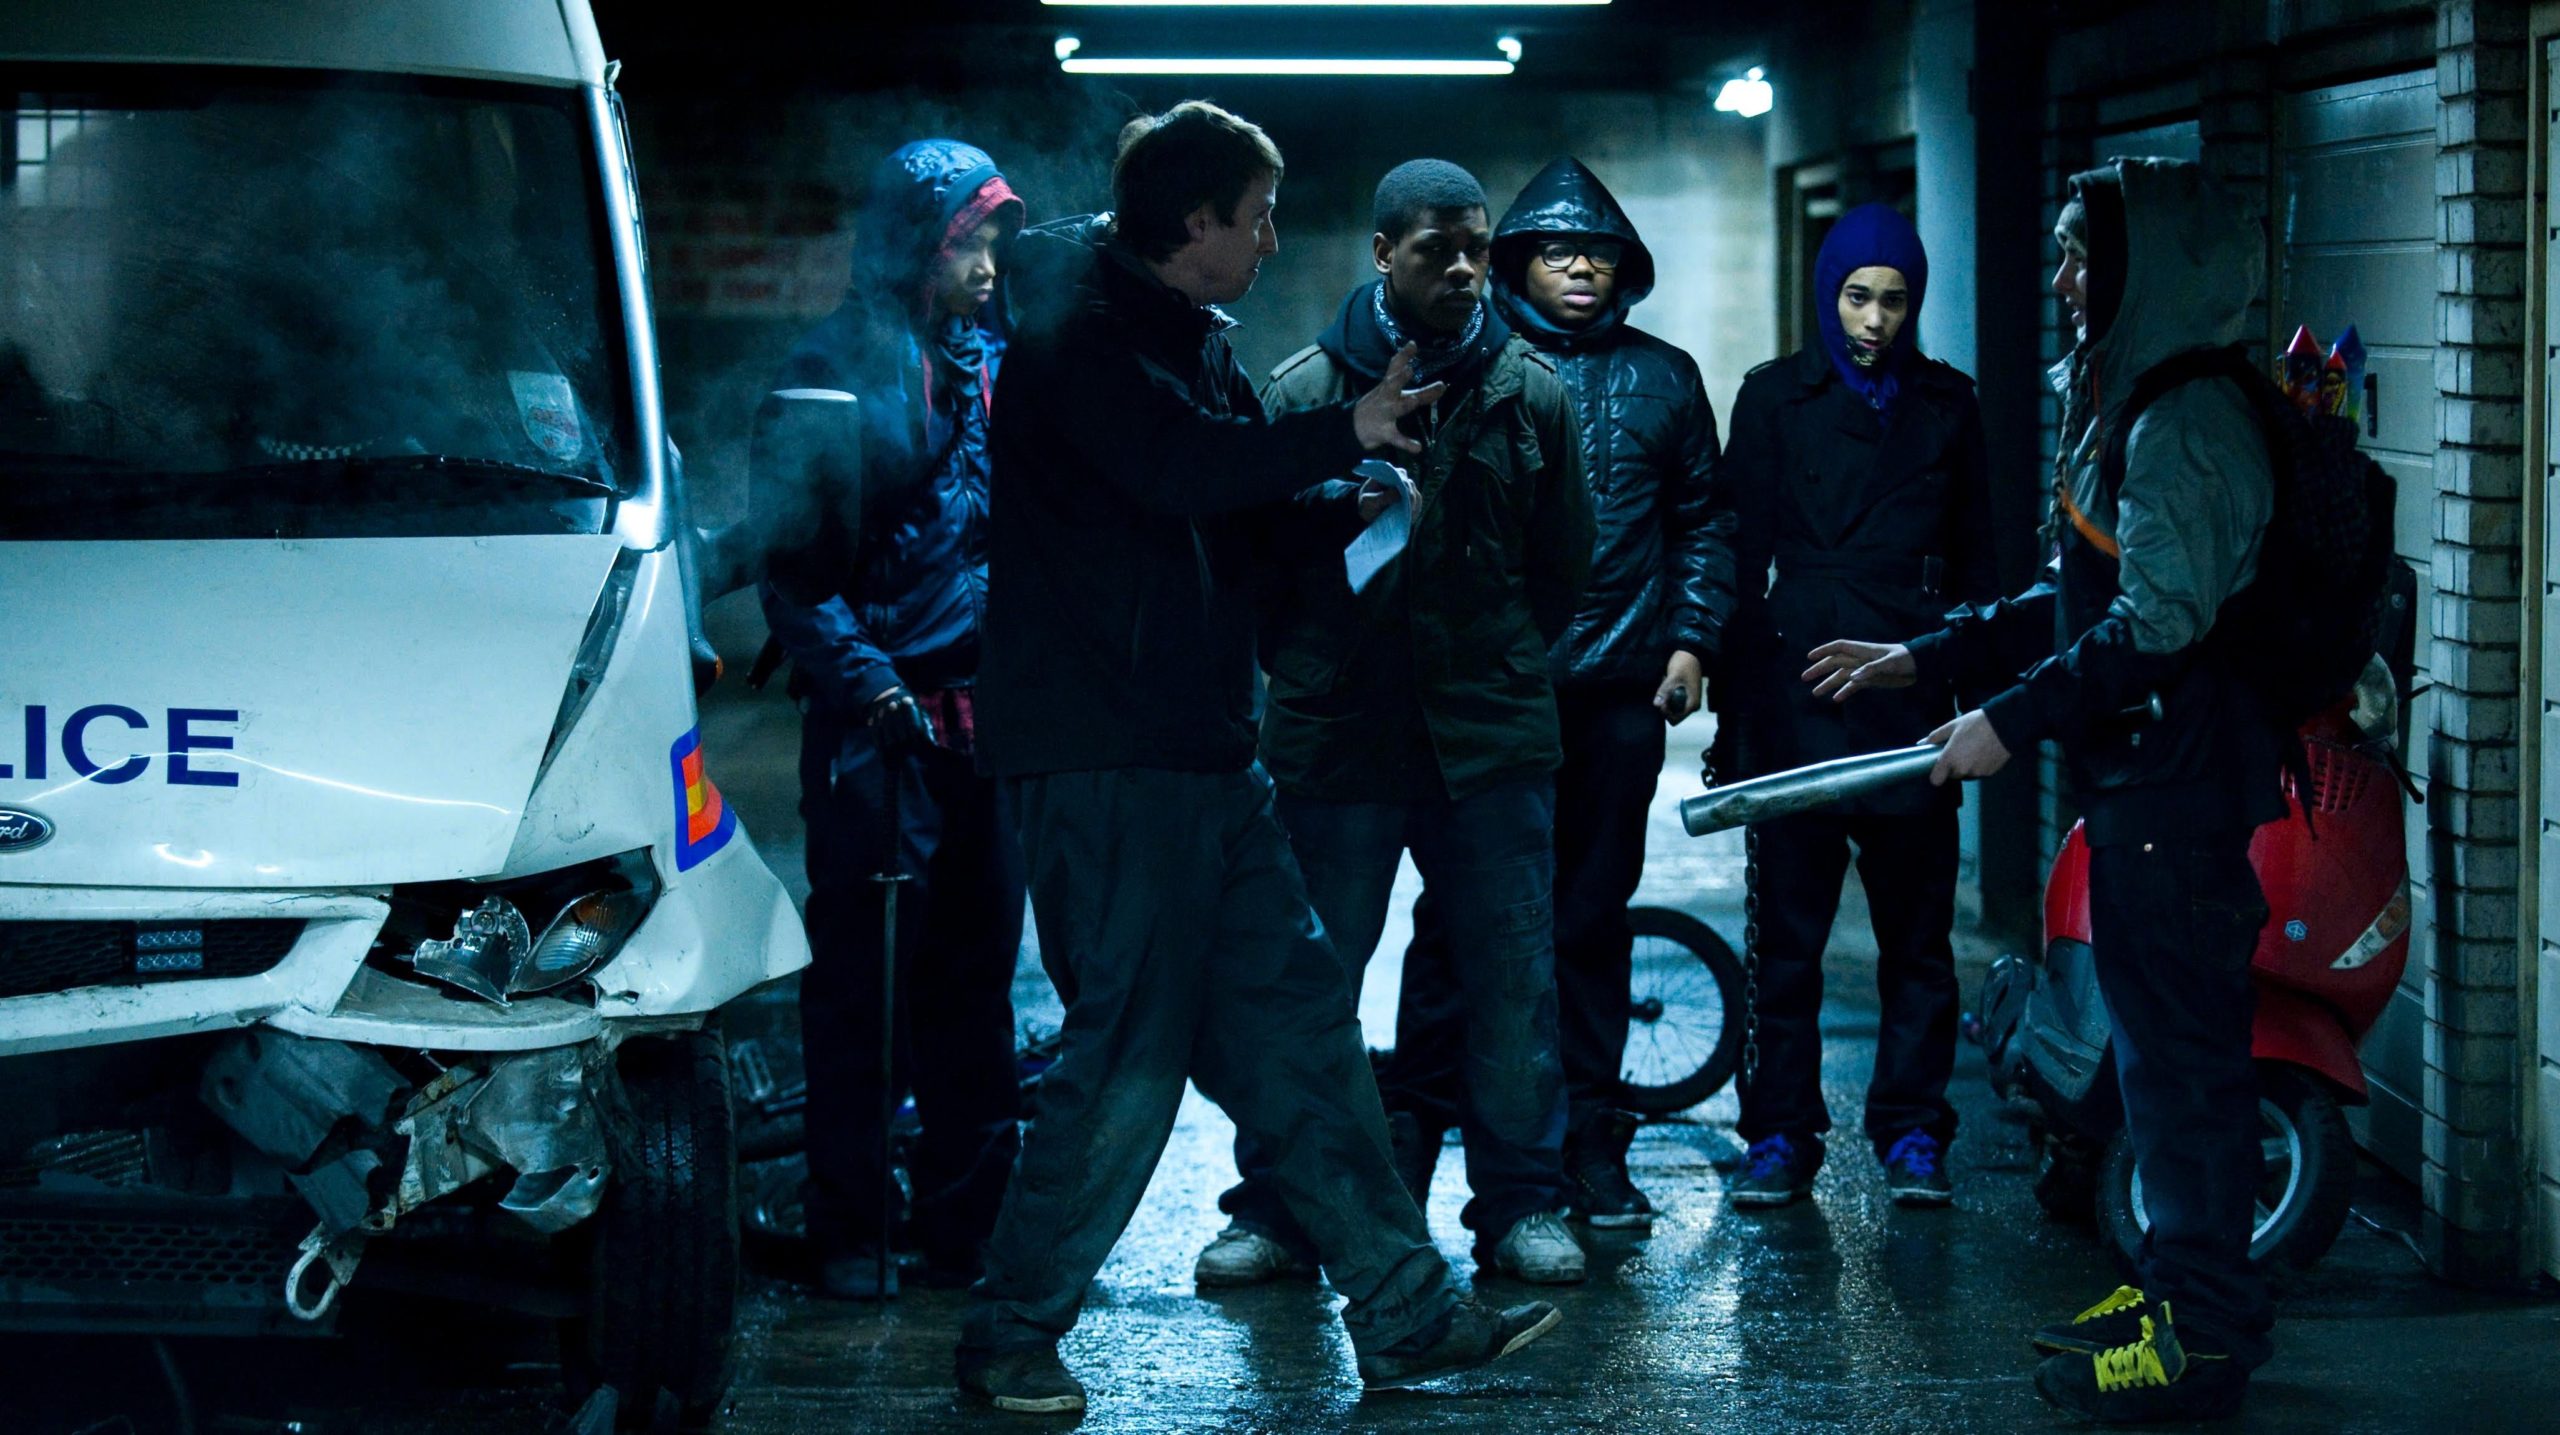 Wright's friend and collaborator Joe Cornish on the set of Attack the Block (Image: StudioCanal)